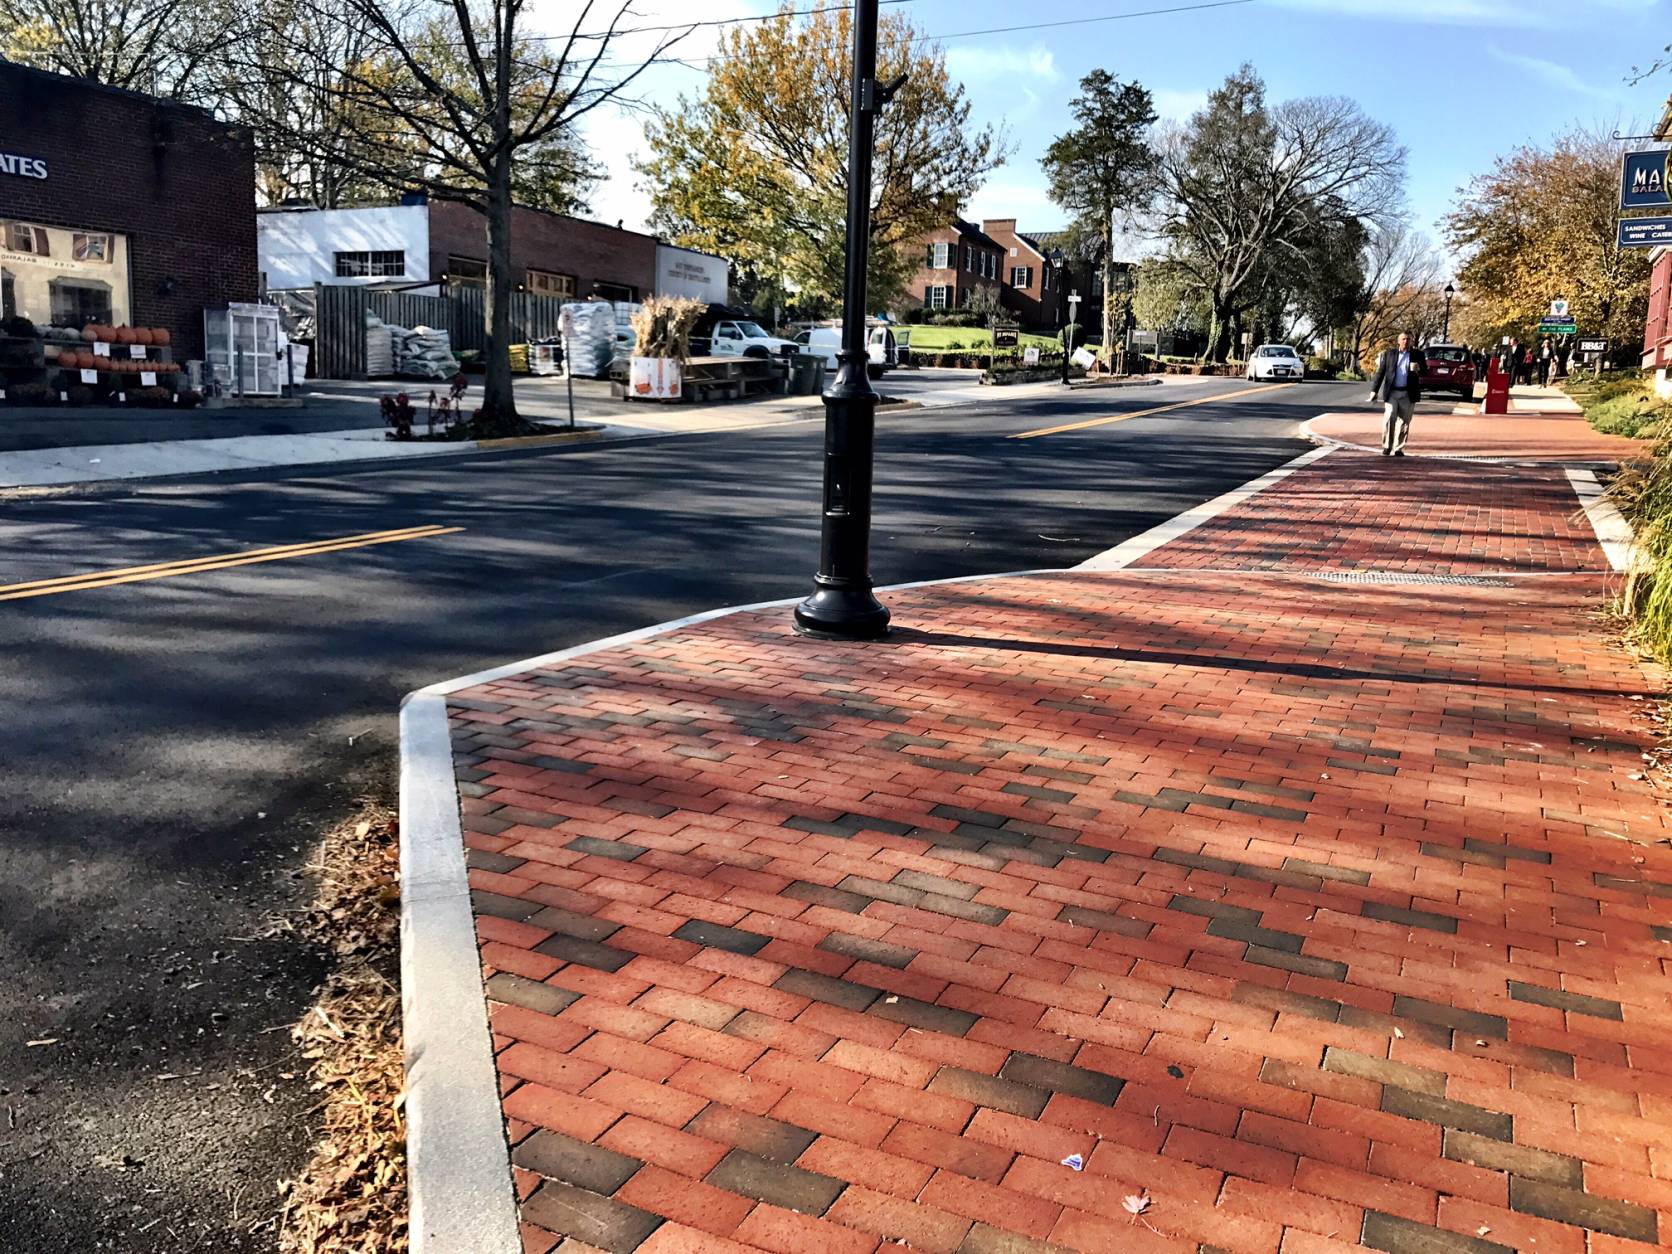 While traffic through Middleburg continues to have one lane of traffic and a parking lame in each direction, the new configuration adds crosswalks across Route 50, which extend further than the width of parked cars.